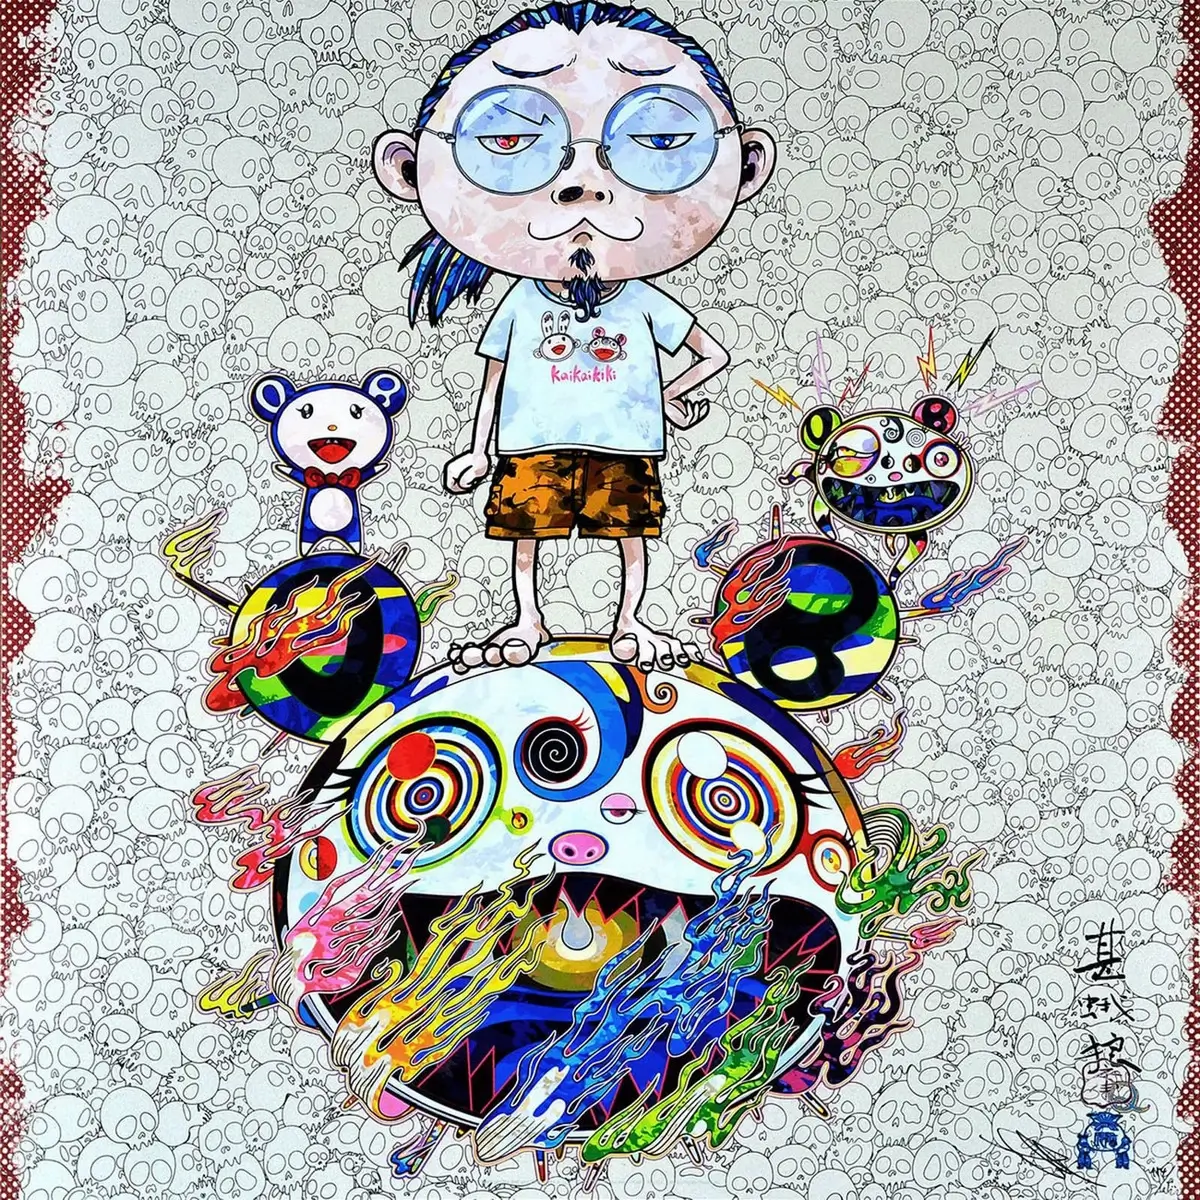 Takashi Murakami, "Obliterate the Self and Even a Fire is Cool", 2013